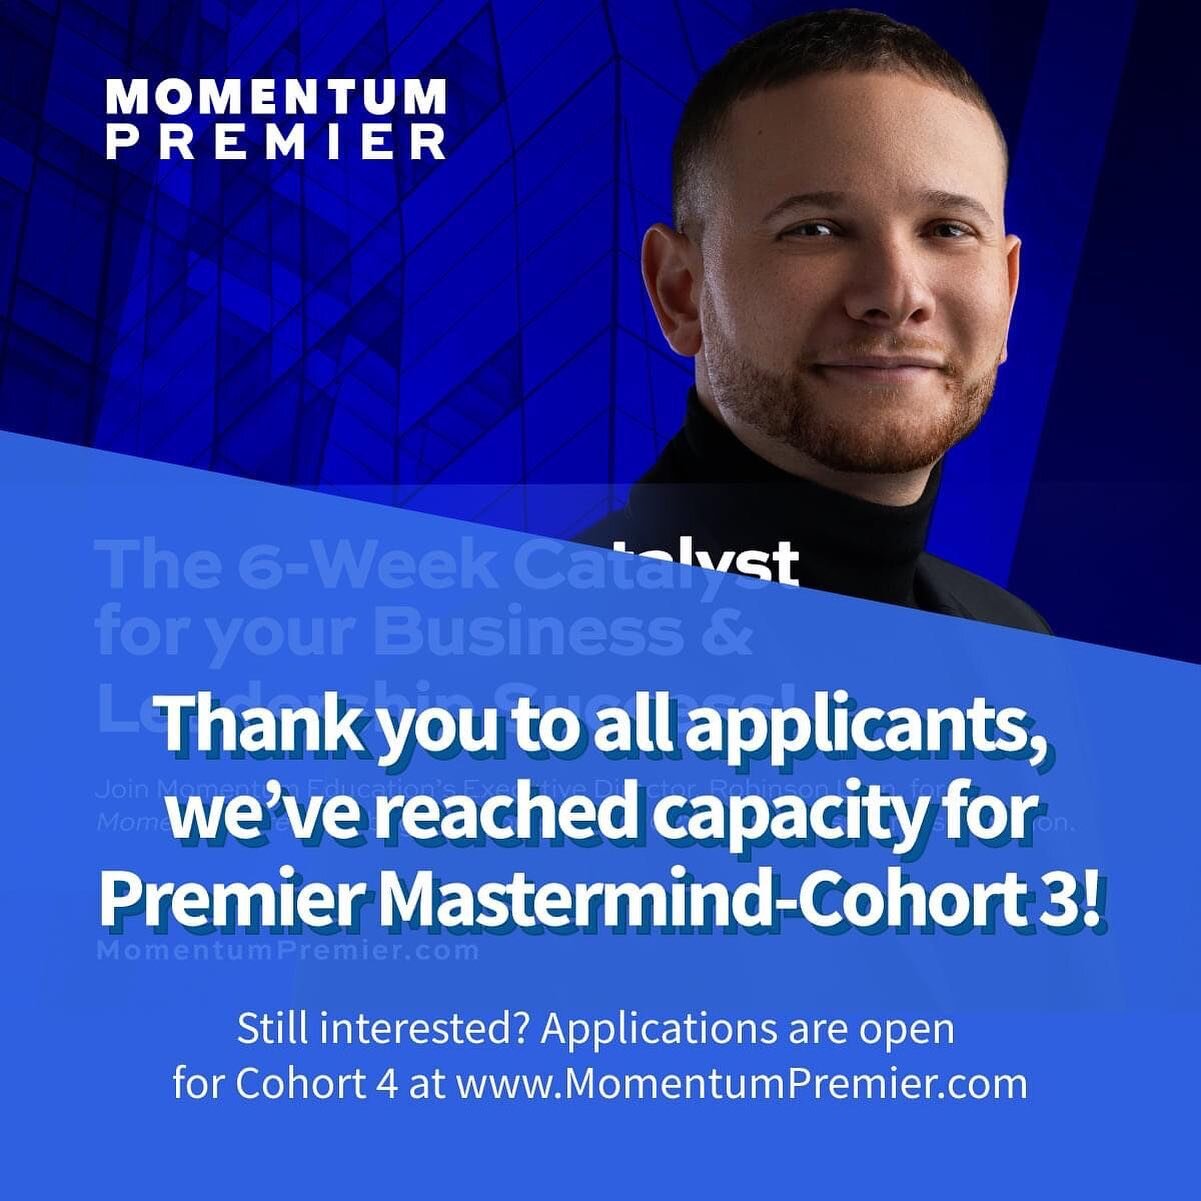 Thank you to all applicants, we&rsquo;ve reached capacity for Premier Mastermind-Cohort 3! 

We&rsquo;re still connecting with all applicants for the Cohort 4 waitlist! Still interested? Apply at www.MomentumPremier.com